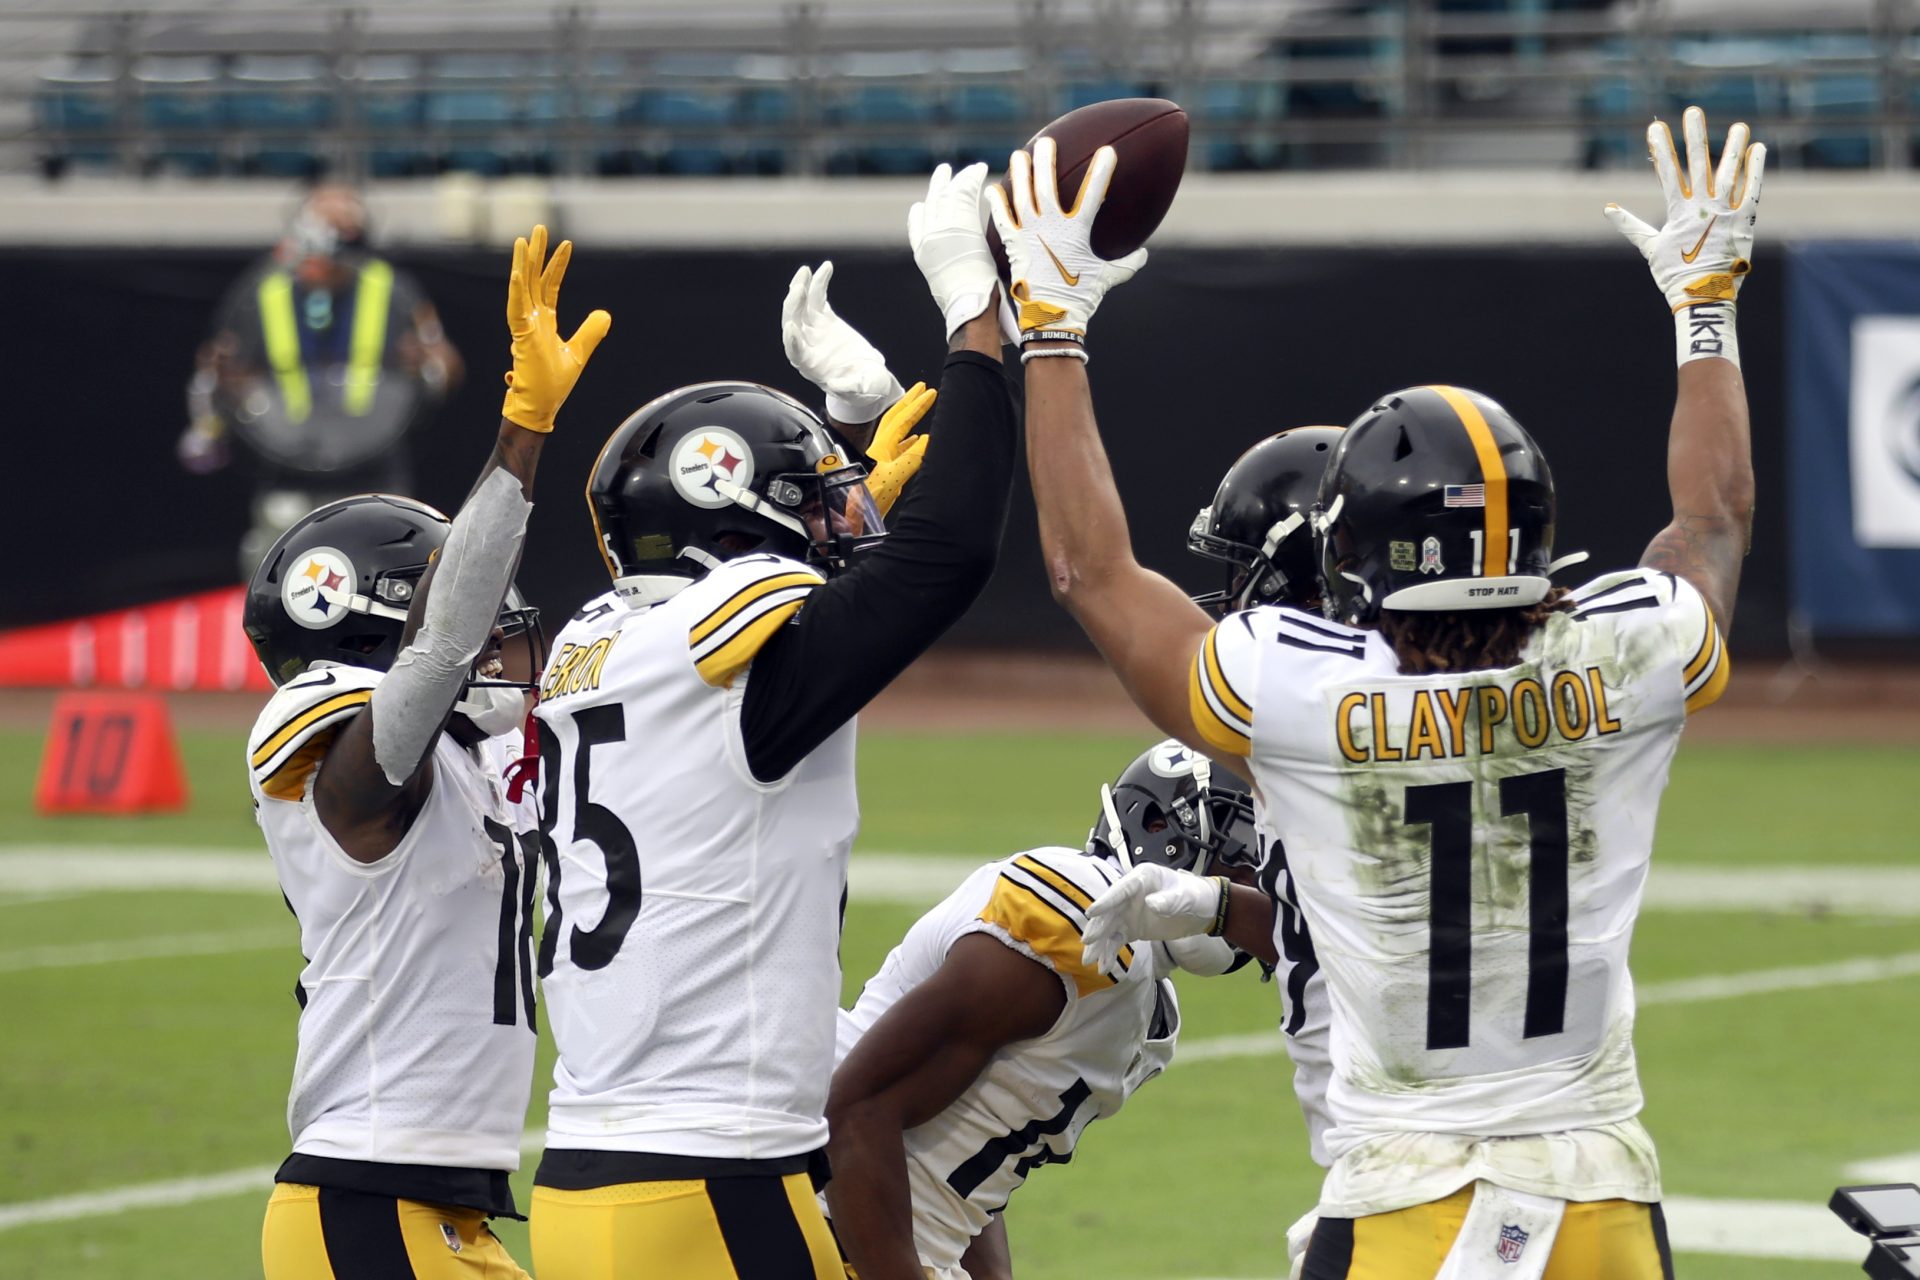 Pittsburgh Steelers players celebrate in the end zone after wide receiver Chase Claypool (11) caught a pass for a touchdown against the Jacksonville Jaguars during the first half of an NFL football game, Sunday, Nov. 22, 2020, in Jacksonville, Fla.